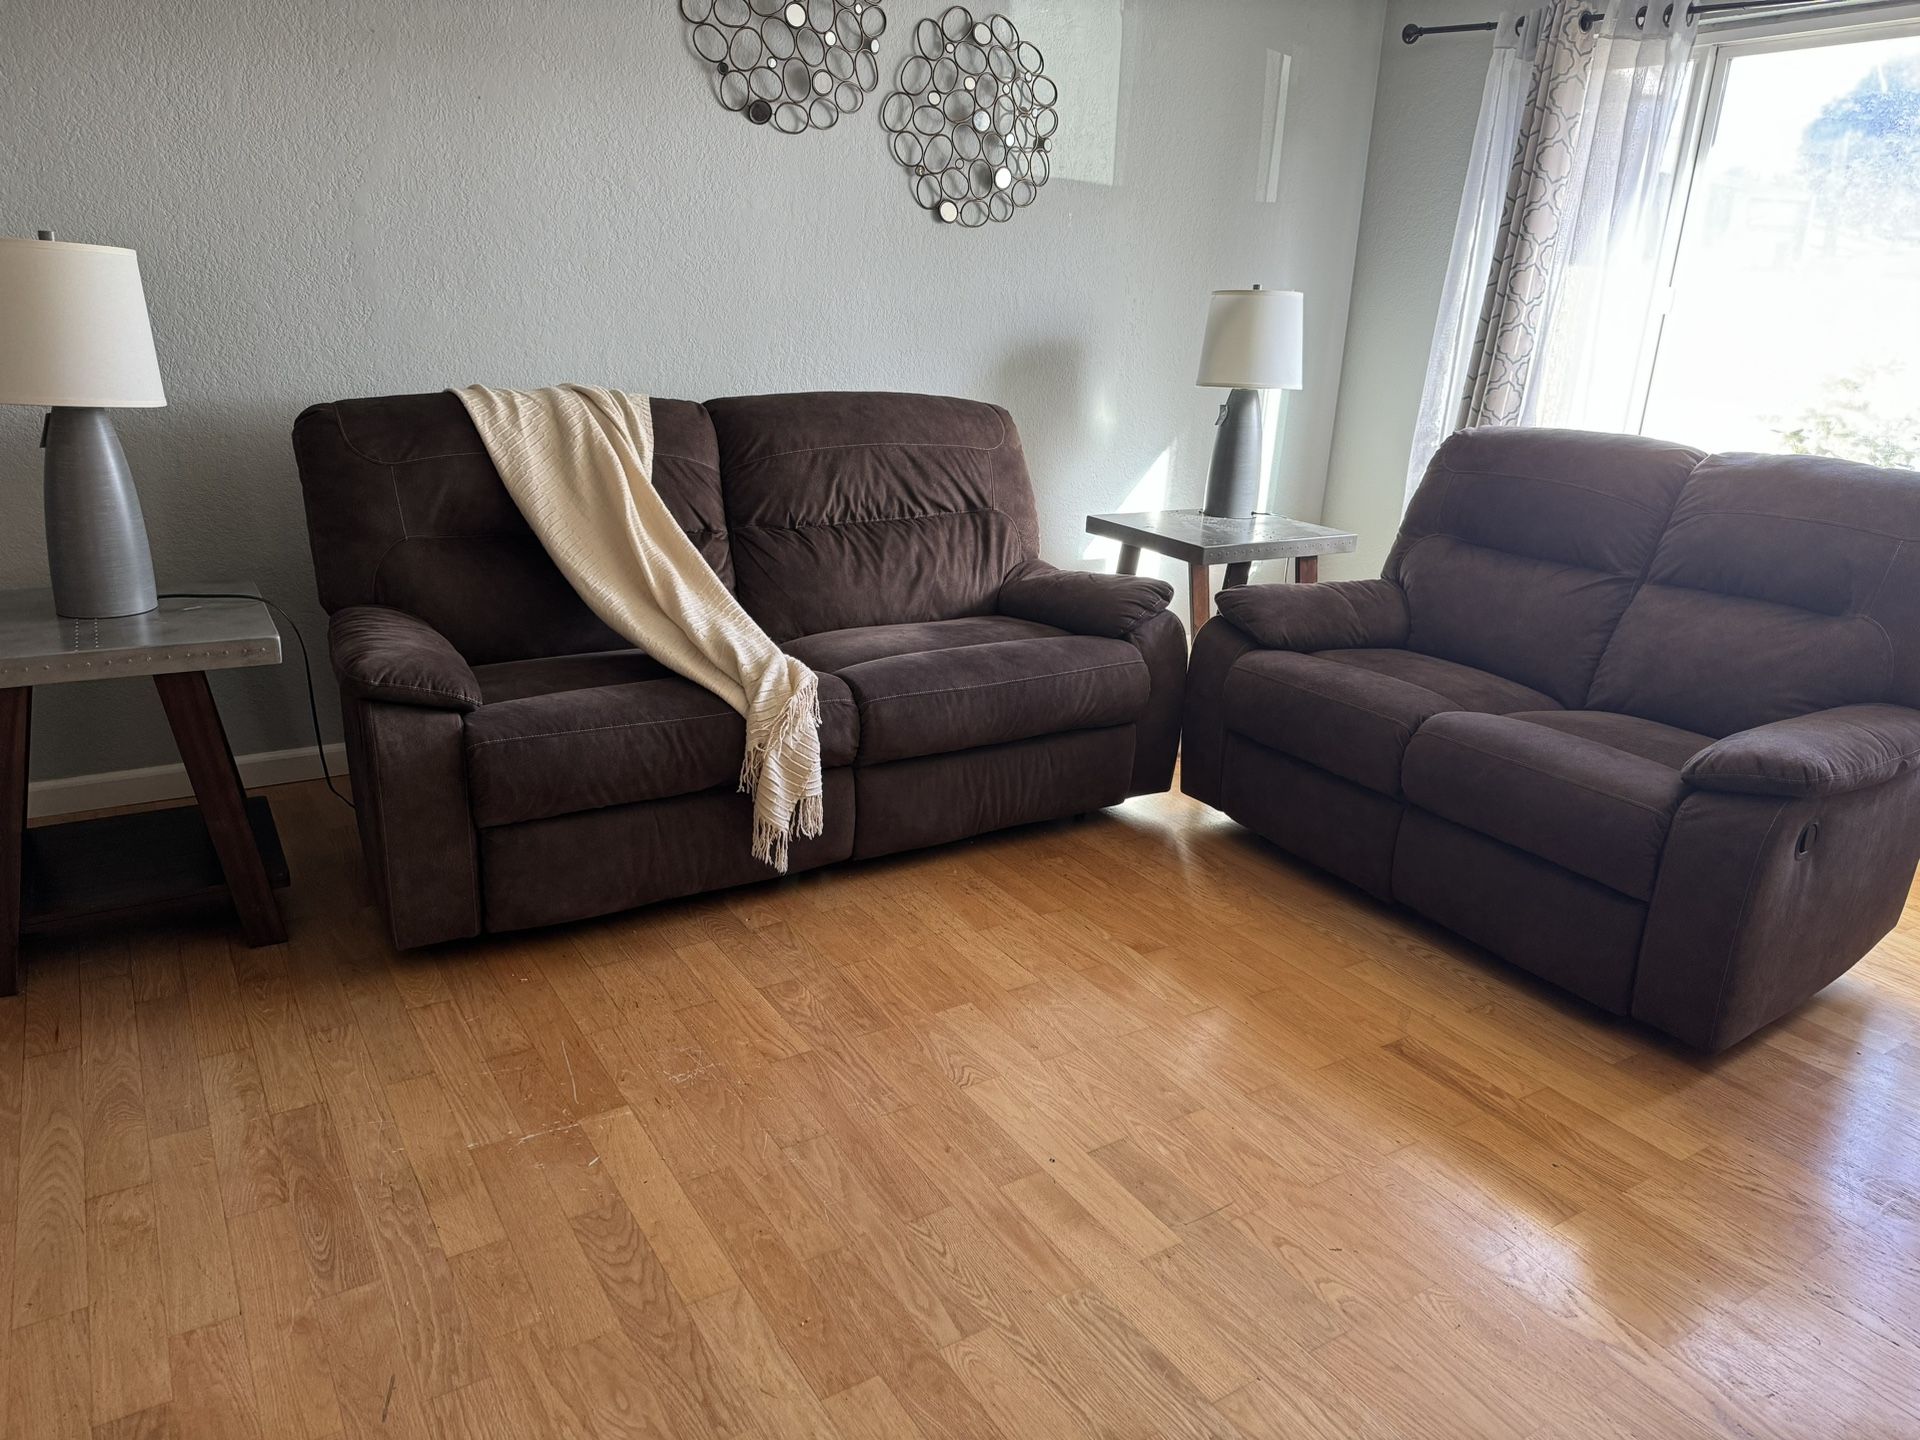 Great Deal Immediate Pick Only - Recliner Sofa, Loveseat, side Tables And Lamps